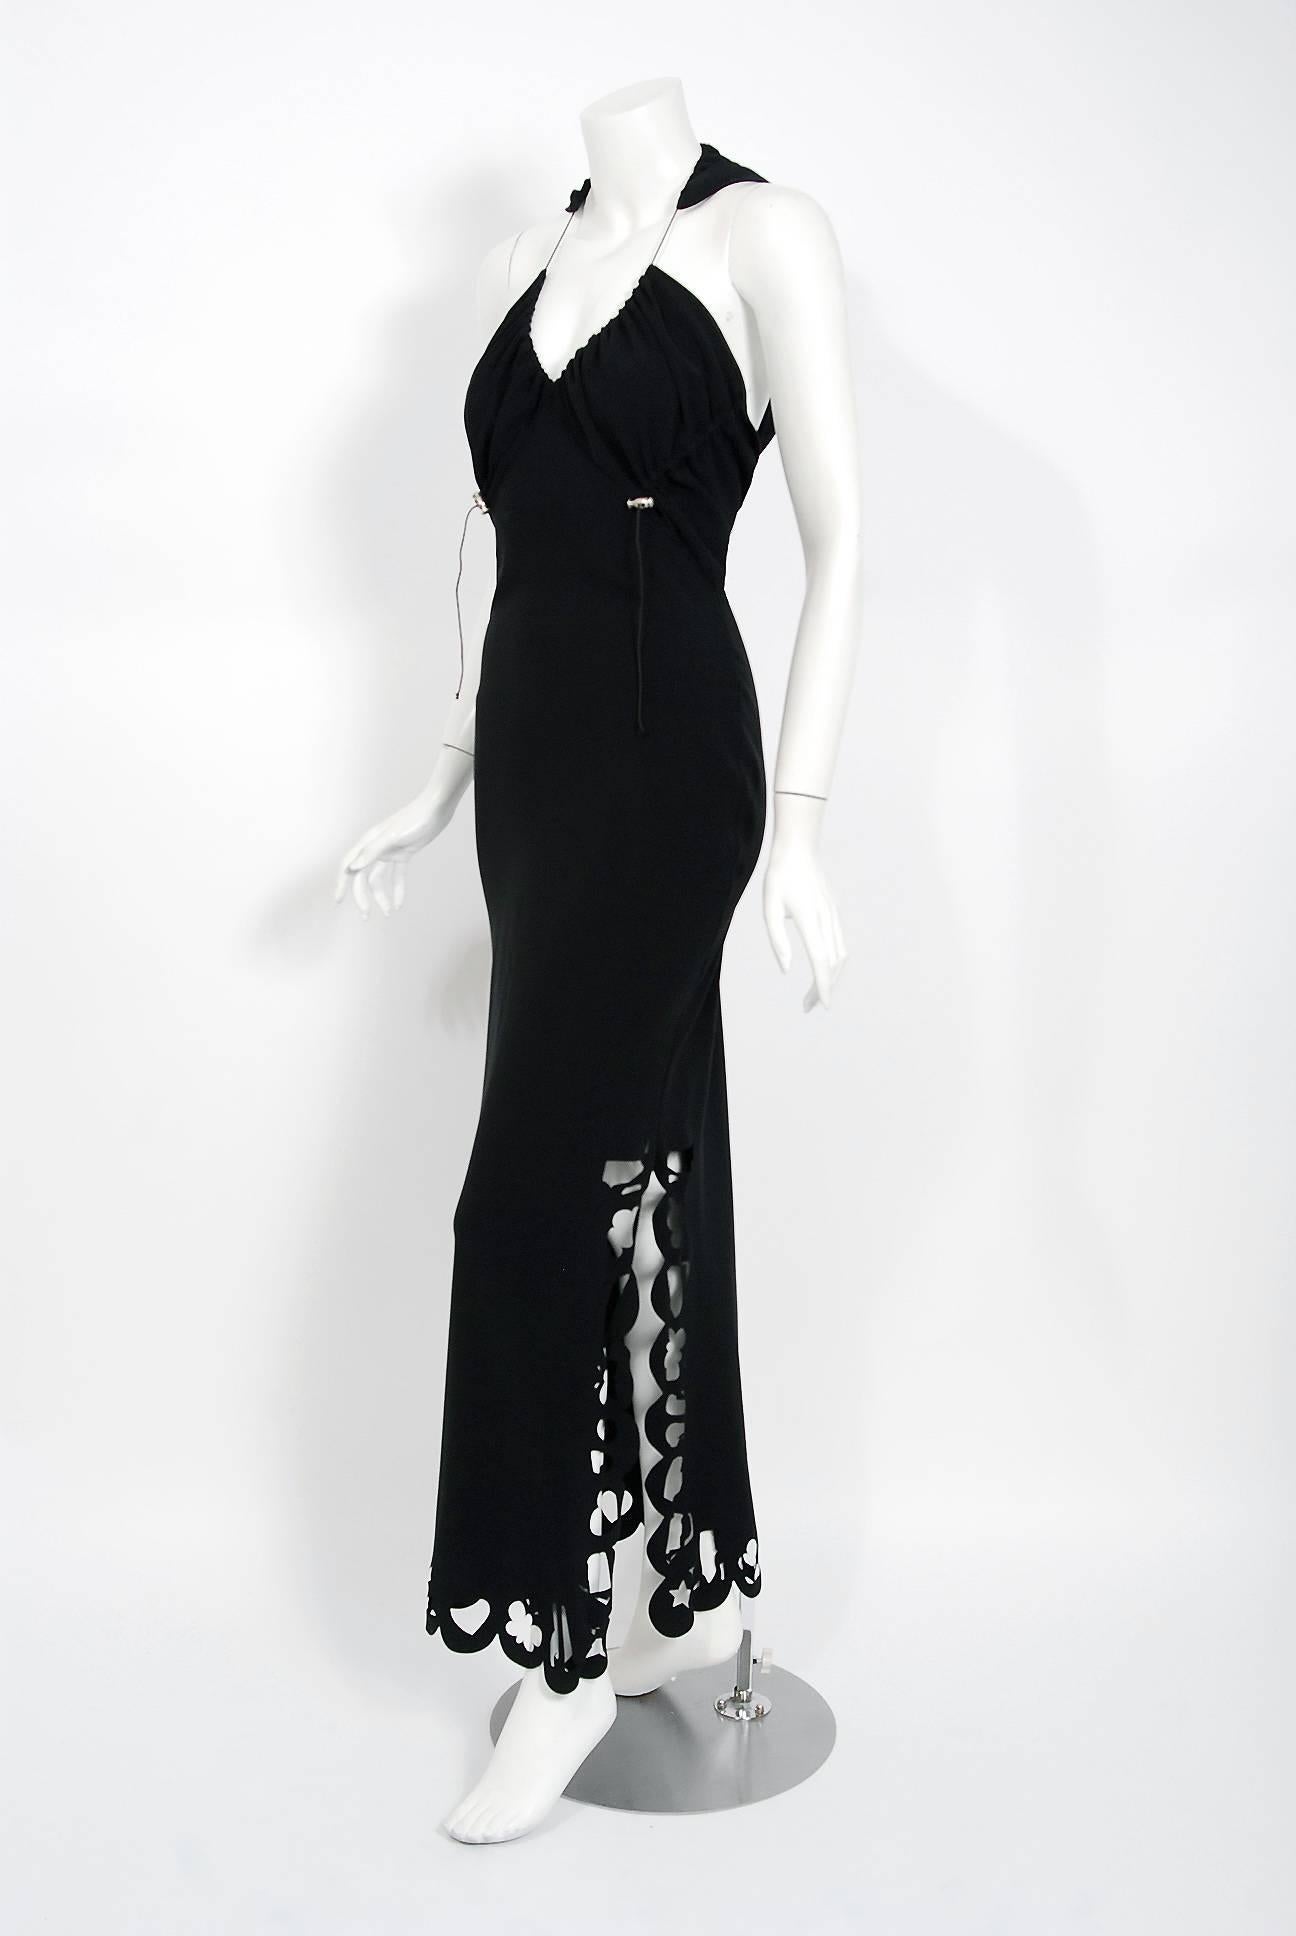 Breathtaking John Galliano black silk laser-cut dress dating back to his 2002 Paris runway collection. This gorgeous garment is new old stock with original $2,520.00 Neiman Marcus price tag. John Galliano is widely considered one of the most